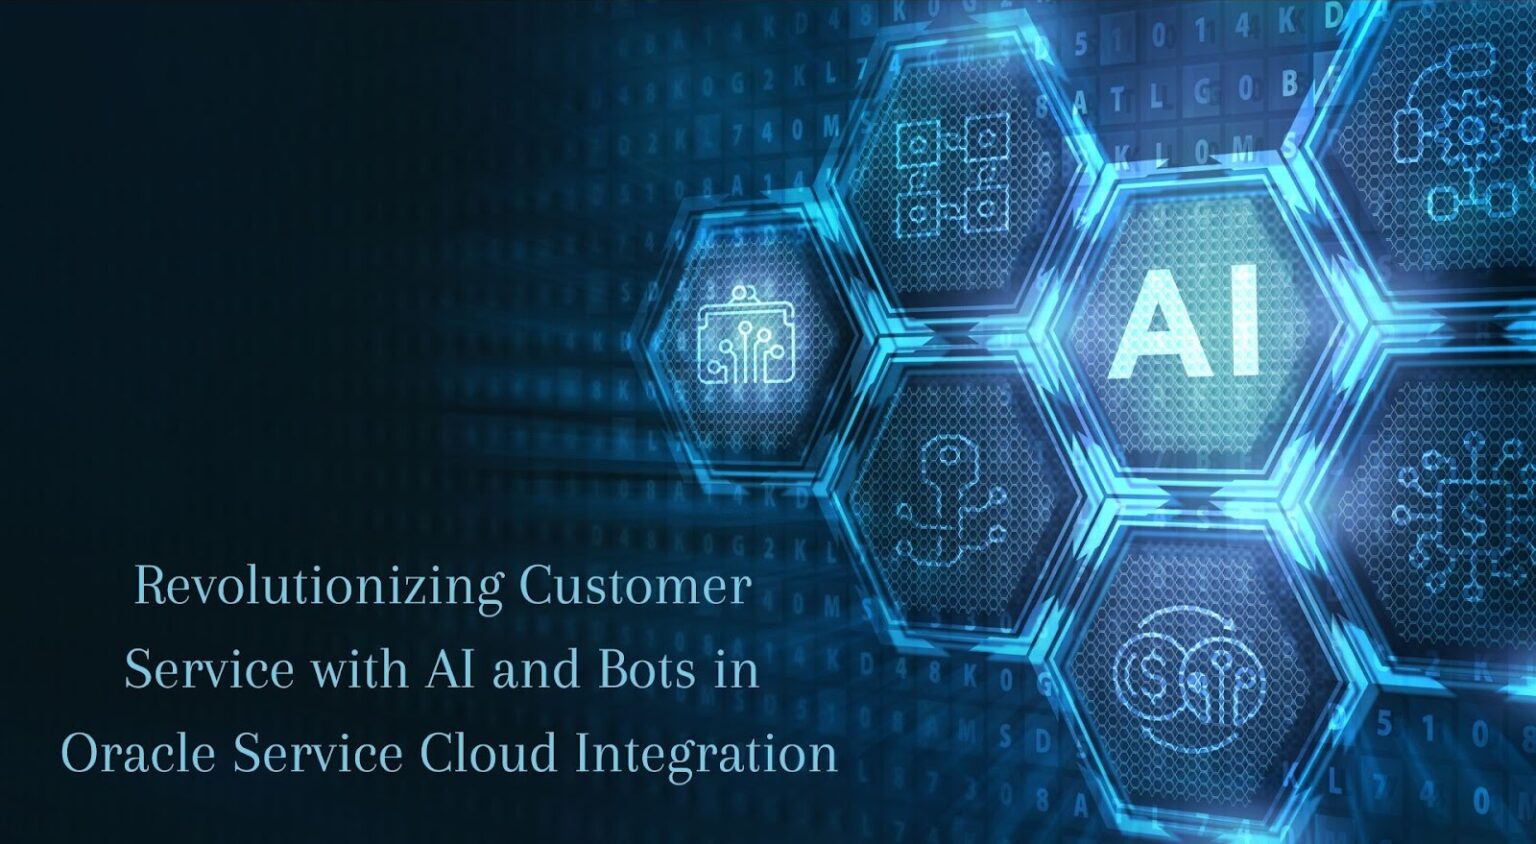 Revolutionizing Customer Service with AI and Bots in Oracle Service Cloud Integration